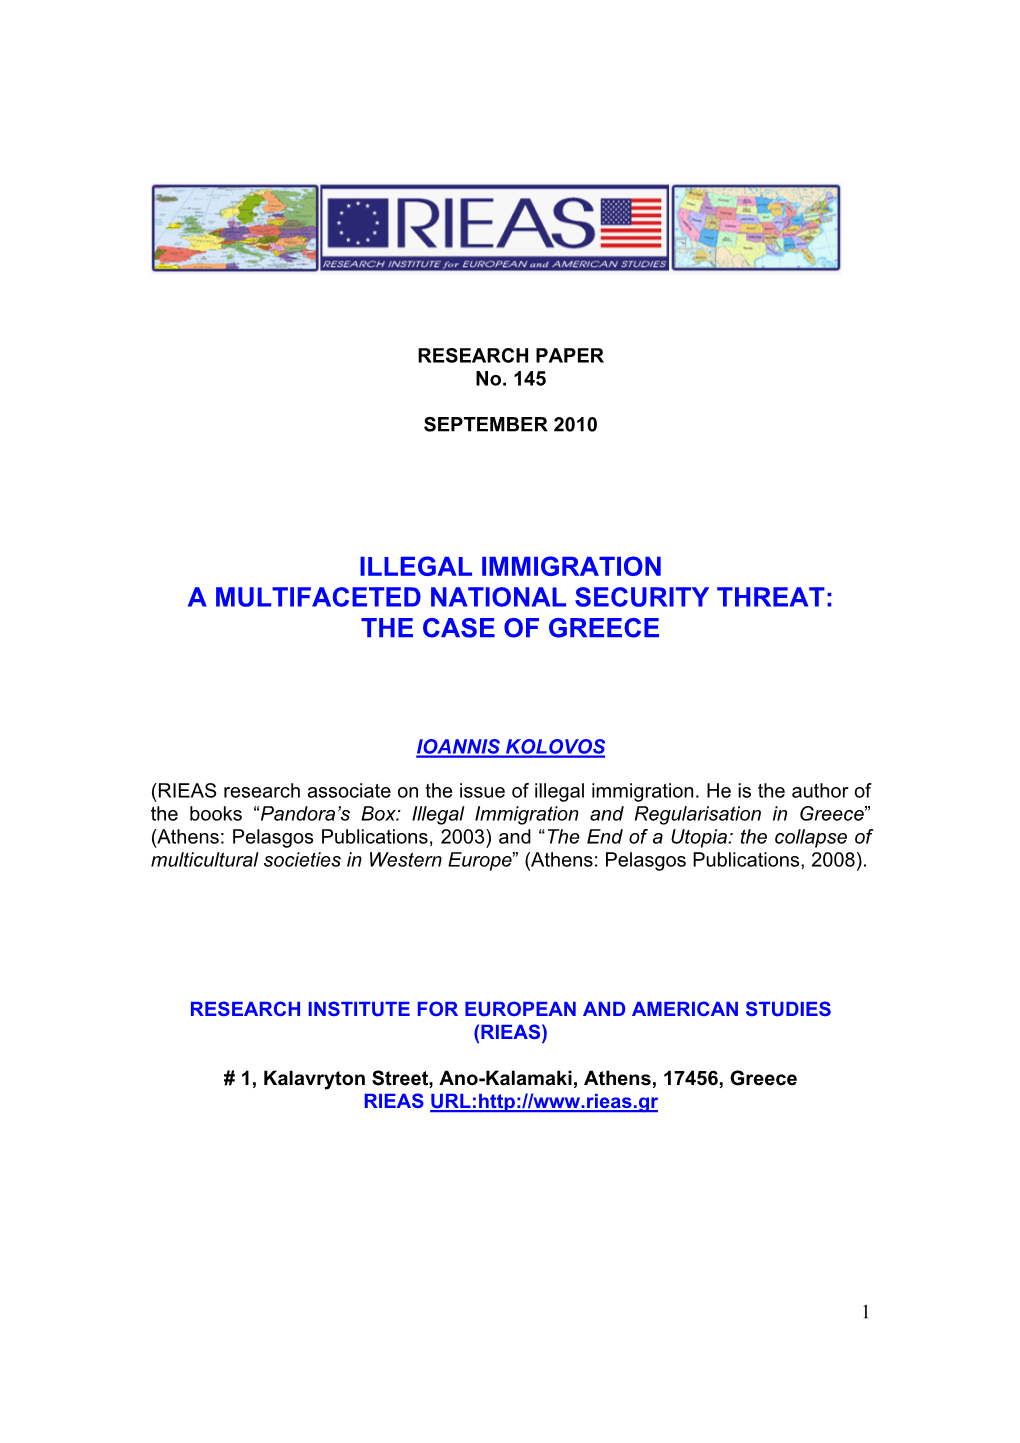 Illegal Immigration a Multifaceted National Security Threat: the Case of Greece